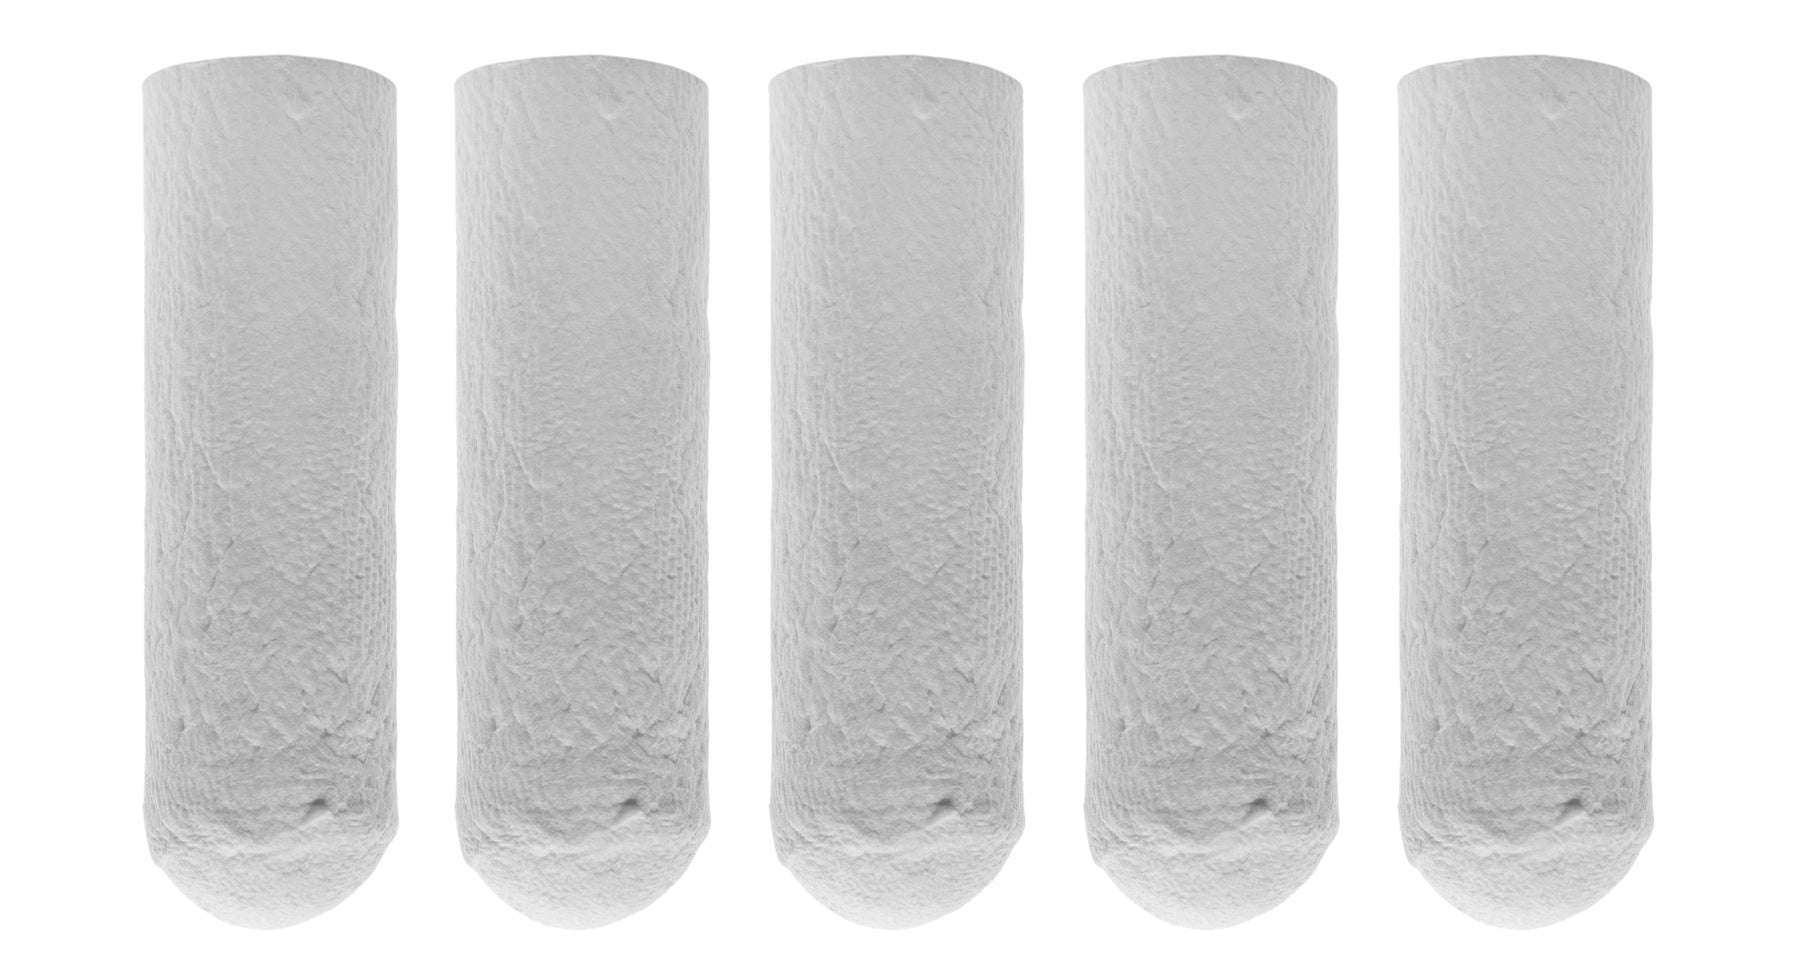 5PK Cellulose Extraction Thimbles, 30mm O.D. x 100mm L - Fits 100mL Soxhlet Extractor CH0888B